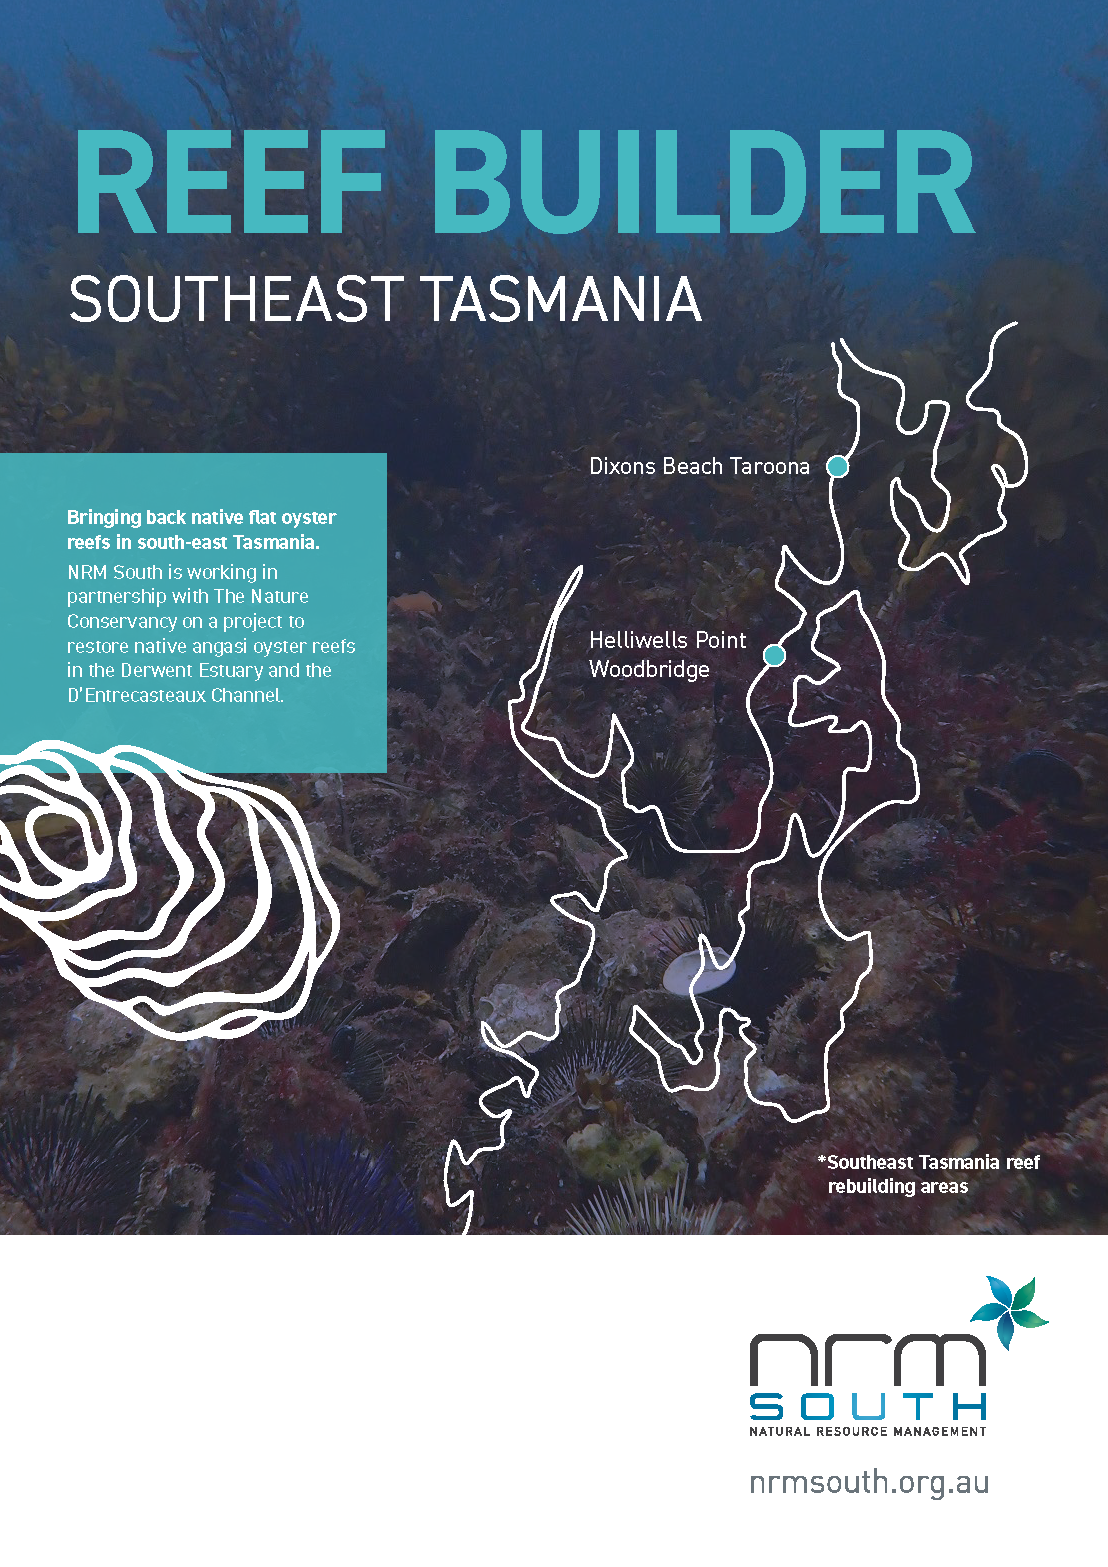 NRM South is working in partnership with The Nature Conservancy on a project to restore native Angasi oyster reefs in the Derwent Estuary and the D’Entrecasteaux Channel.